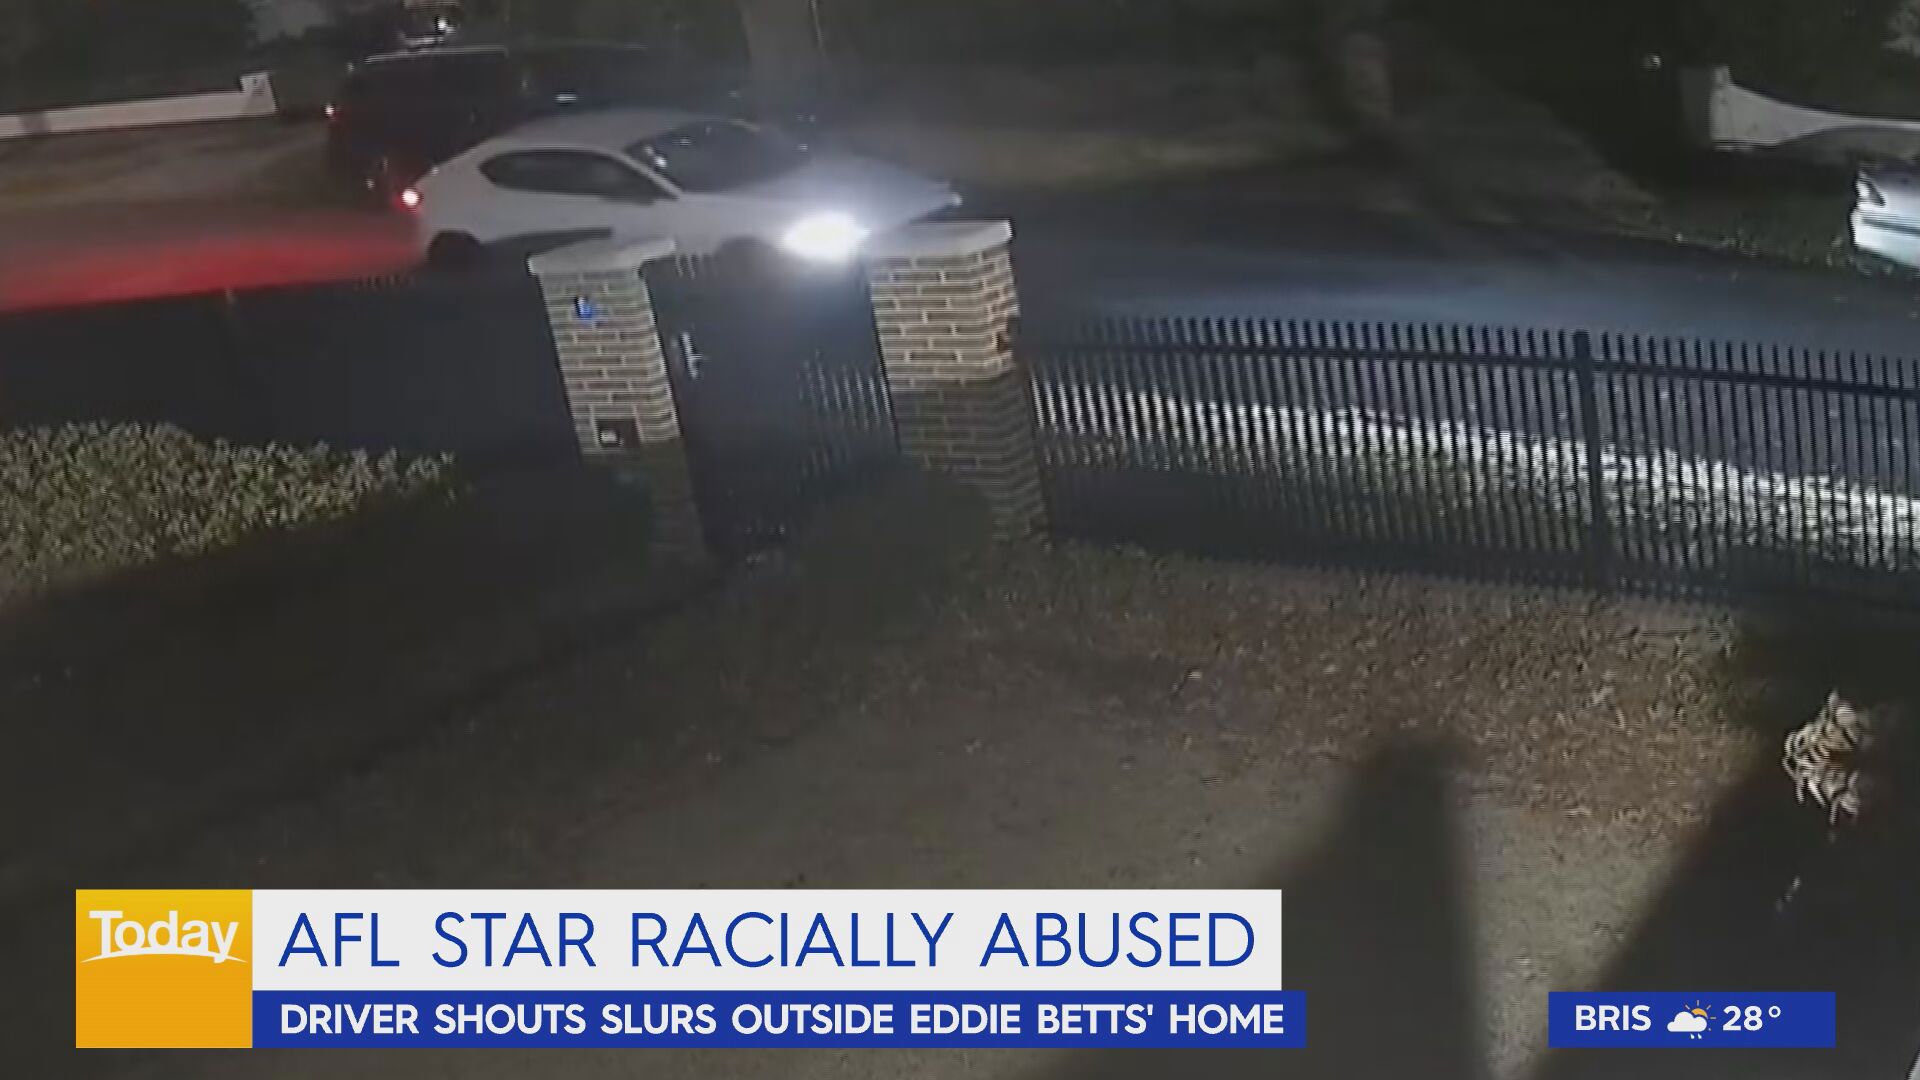 eddie betts shares video of driver yelling racial abuse hurled at children